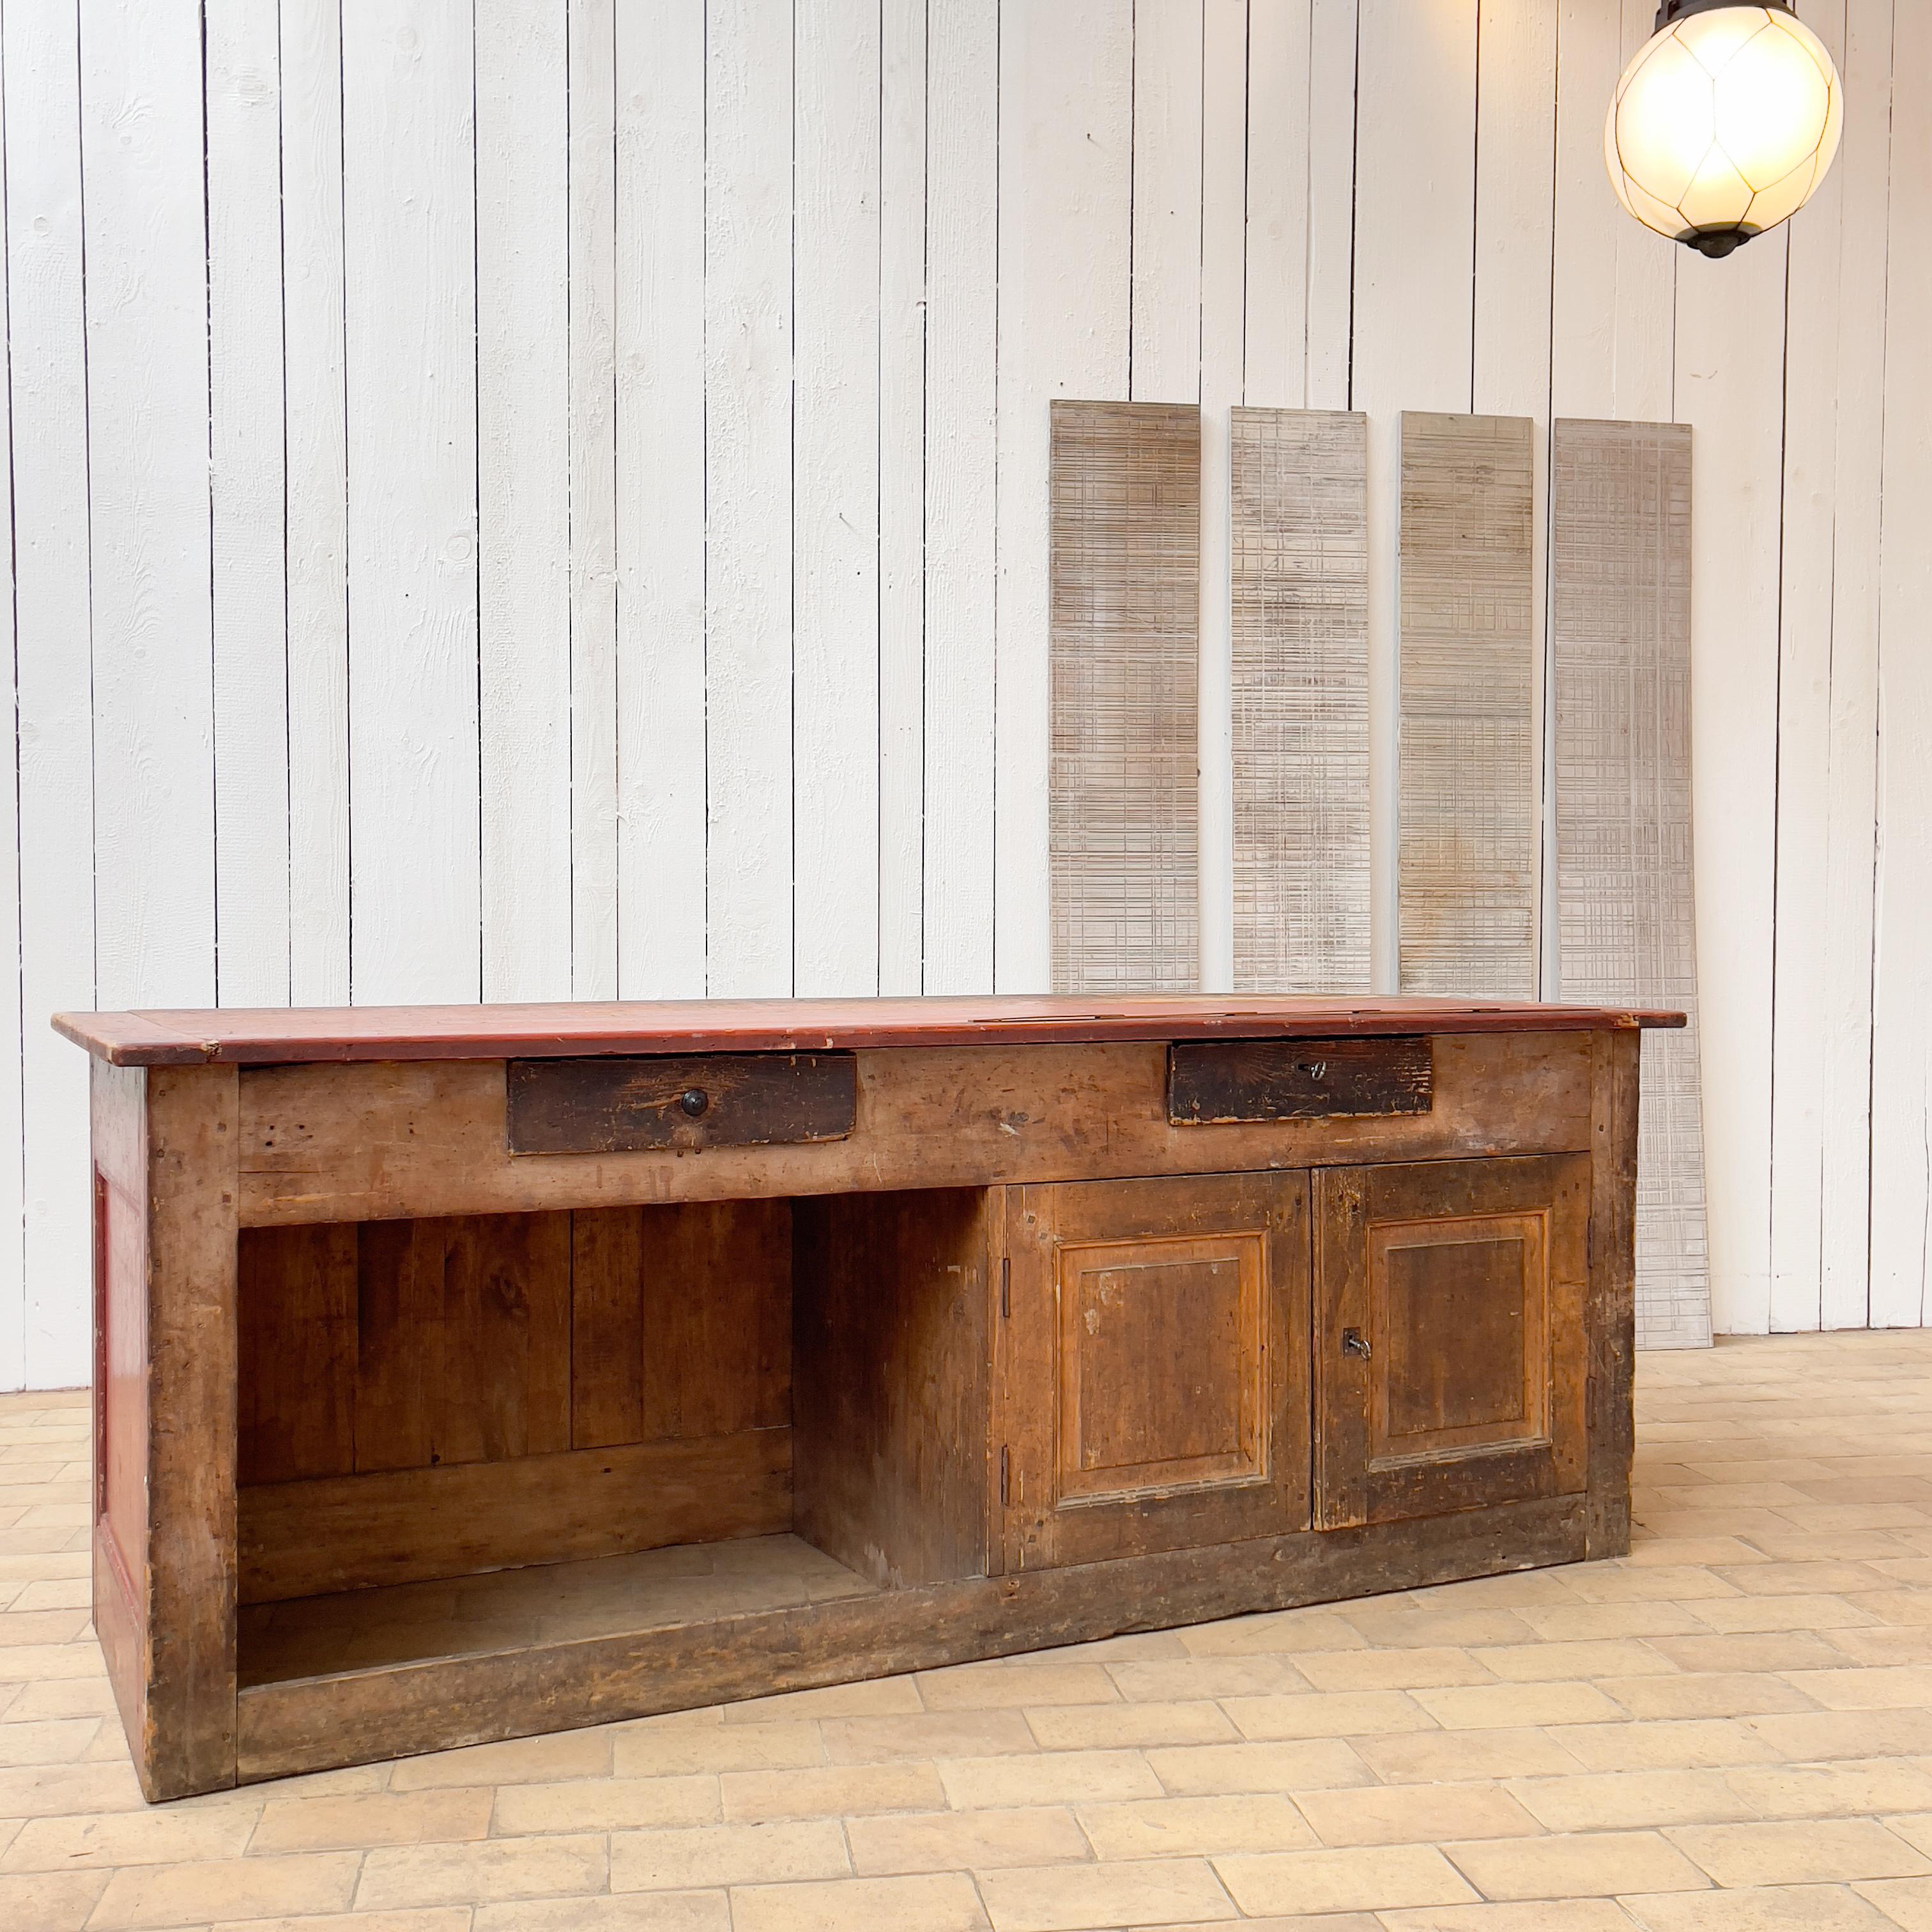 Former French tailor's counter c.1900
Superb patina of time
2 drawers and 2 doors
Oak top
Good condition.